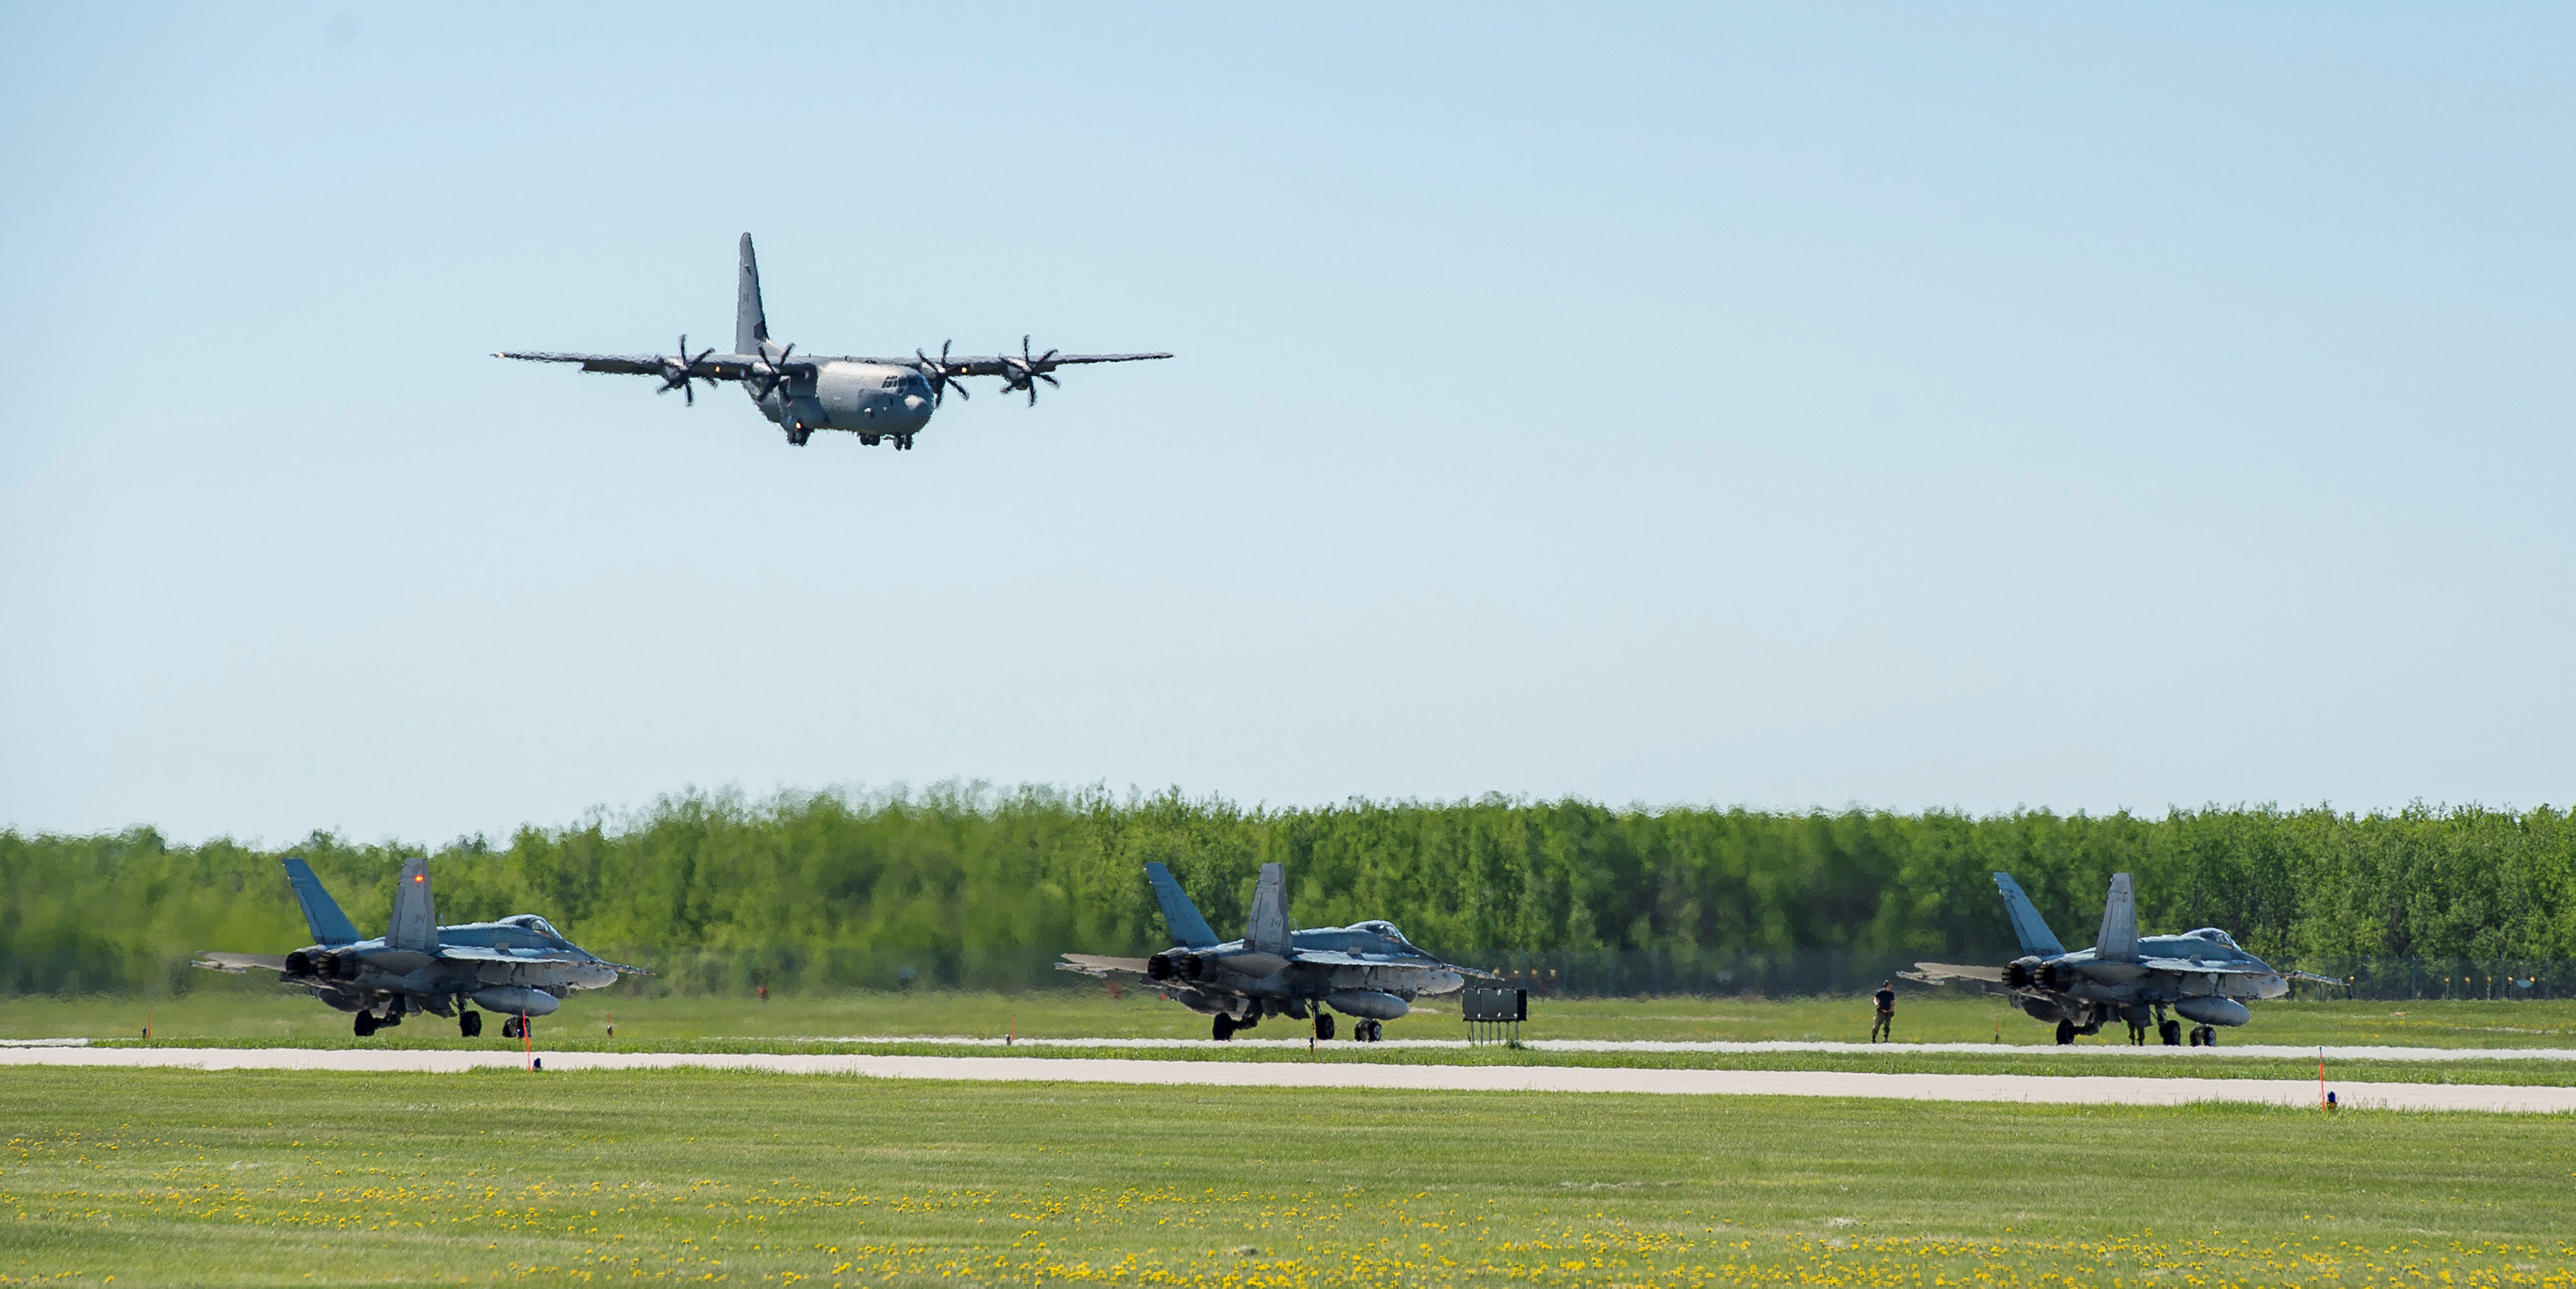 A Royal Canadian Air Force CC-130 Hercules starts its descent as three CF-188 Hornets sit on the tarmac during Exercise MAPLE FLAG 50 at 4 Wing Cold Lake, Alberta, Canada on May 29, 2017.  ( Justin Roy / Courtesy Canadian Armed Forces via Reuters)